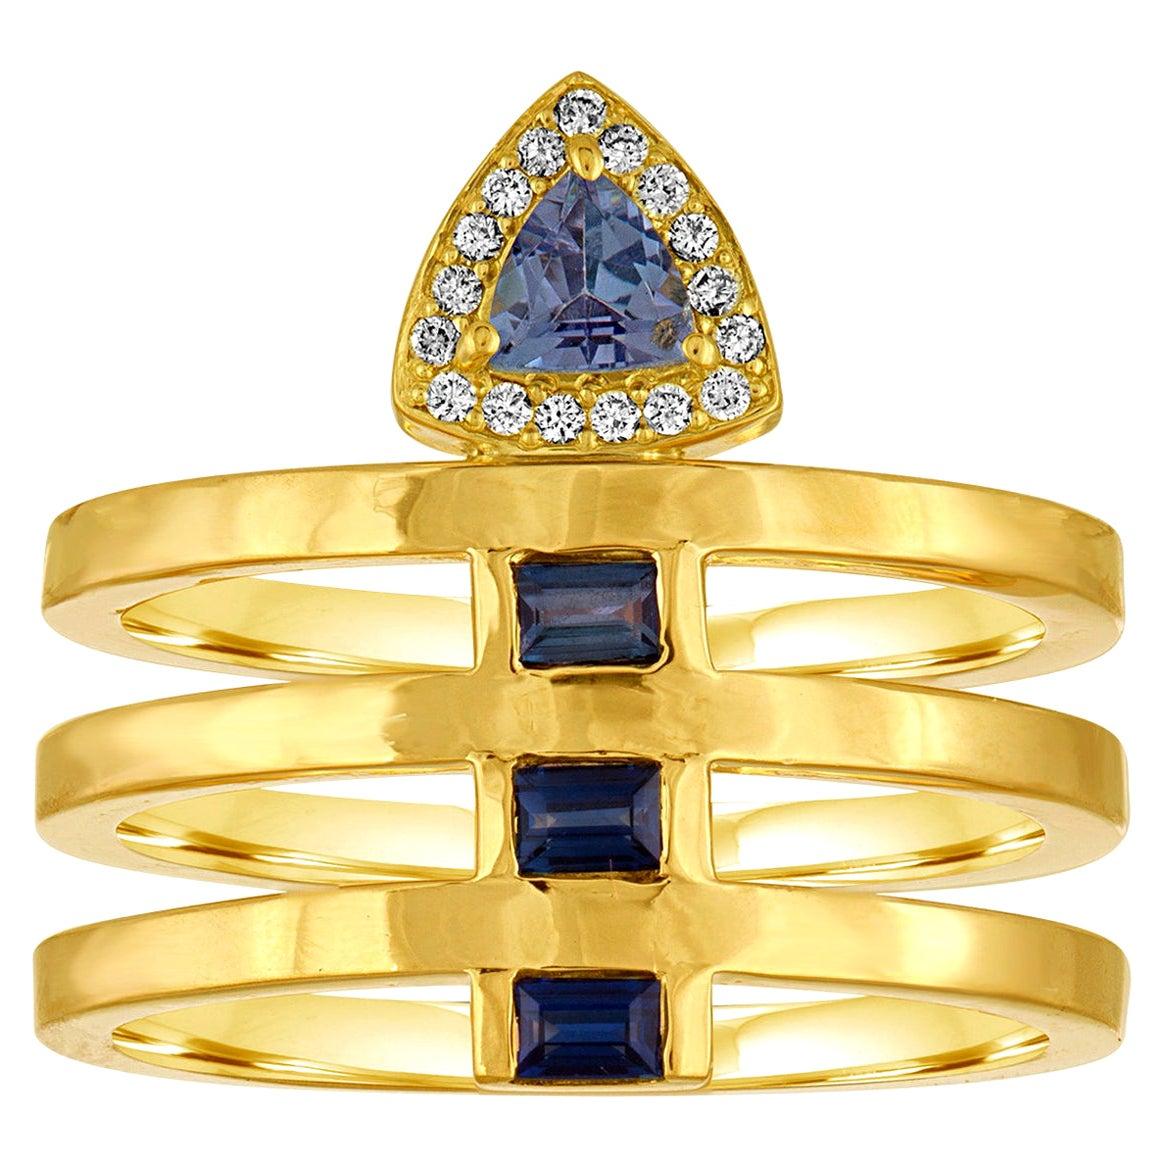 For Sale:  18 Karat Band Ring with Tanzanite, Sapphires and Diamonds